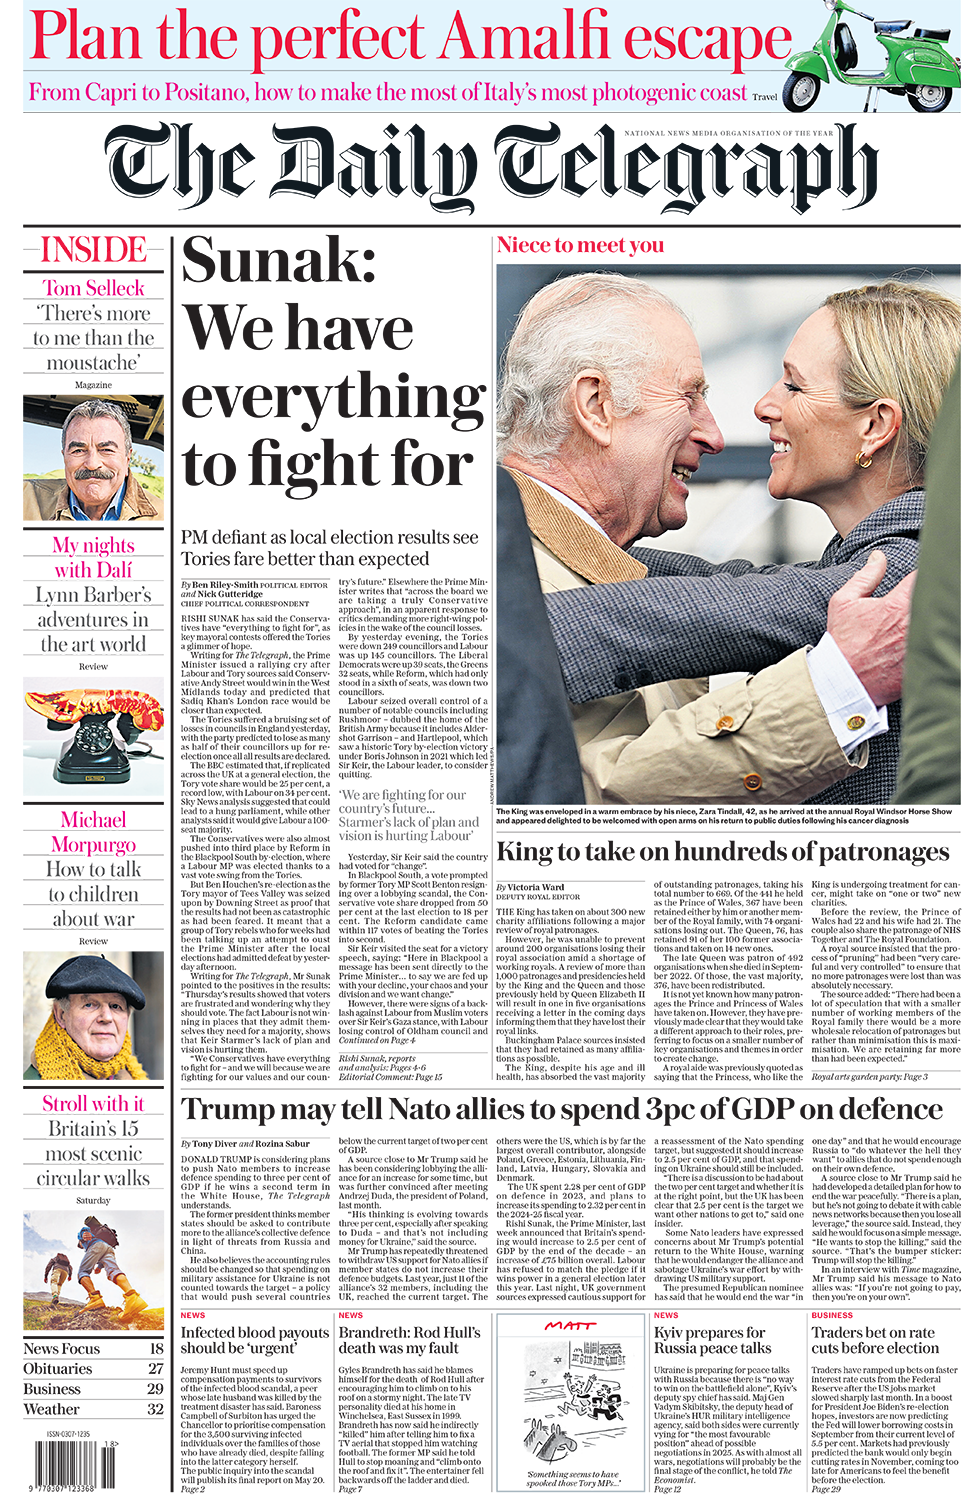 The main headline on the front page of the Daily Telegraph reads: "Sunak: We have everything to fight for"